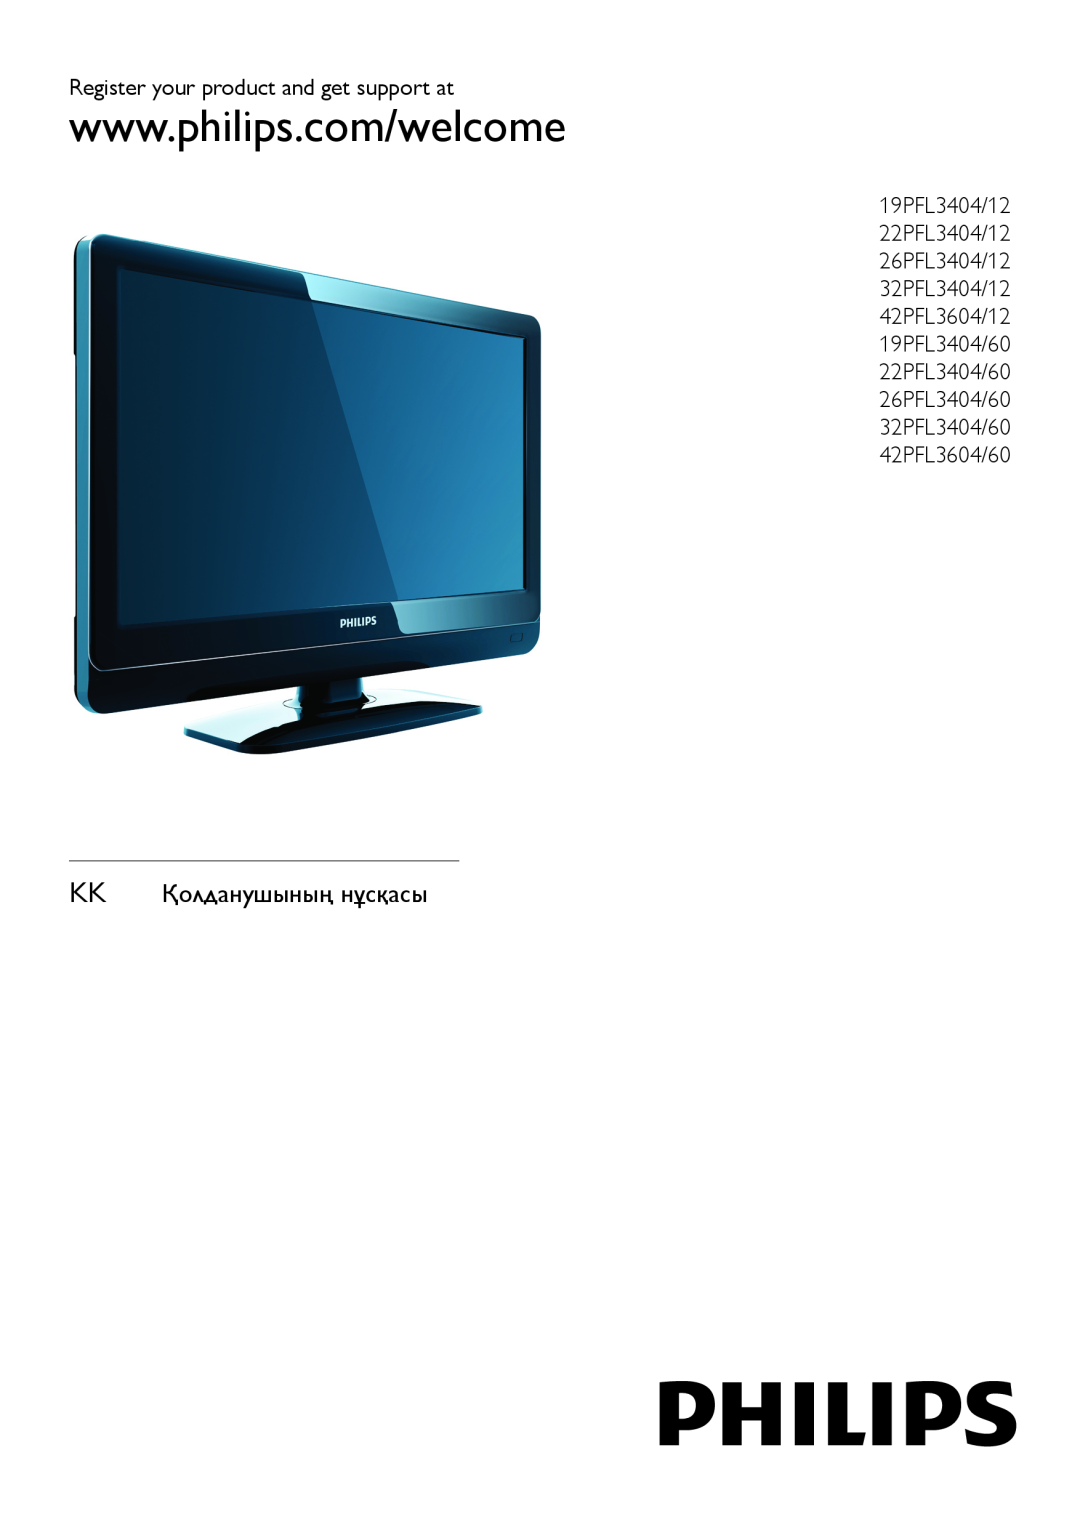 Philips 26PFL3404/60, 42PFL3604/12 manual RU Руководство пользователя, Register your product and get support at 